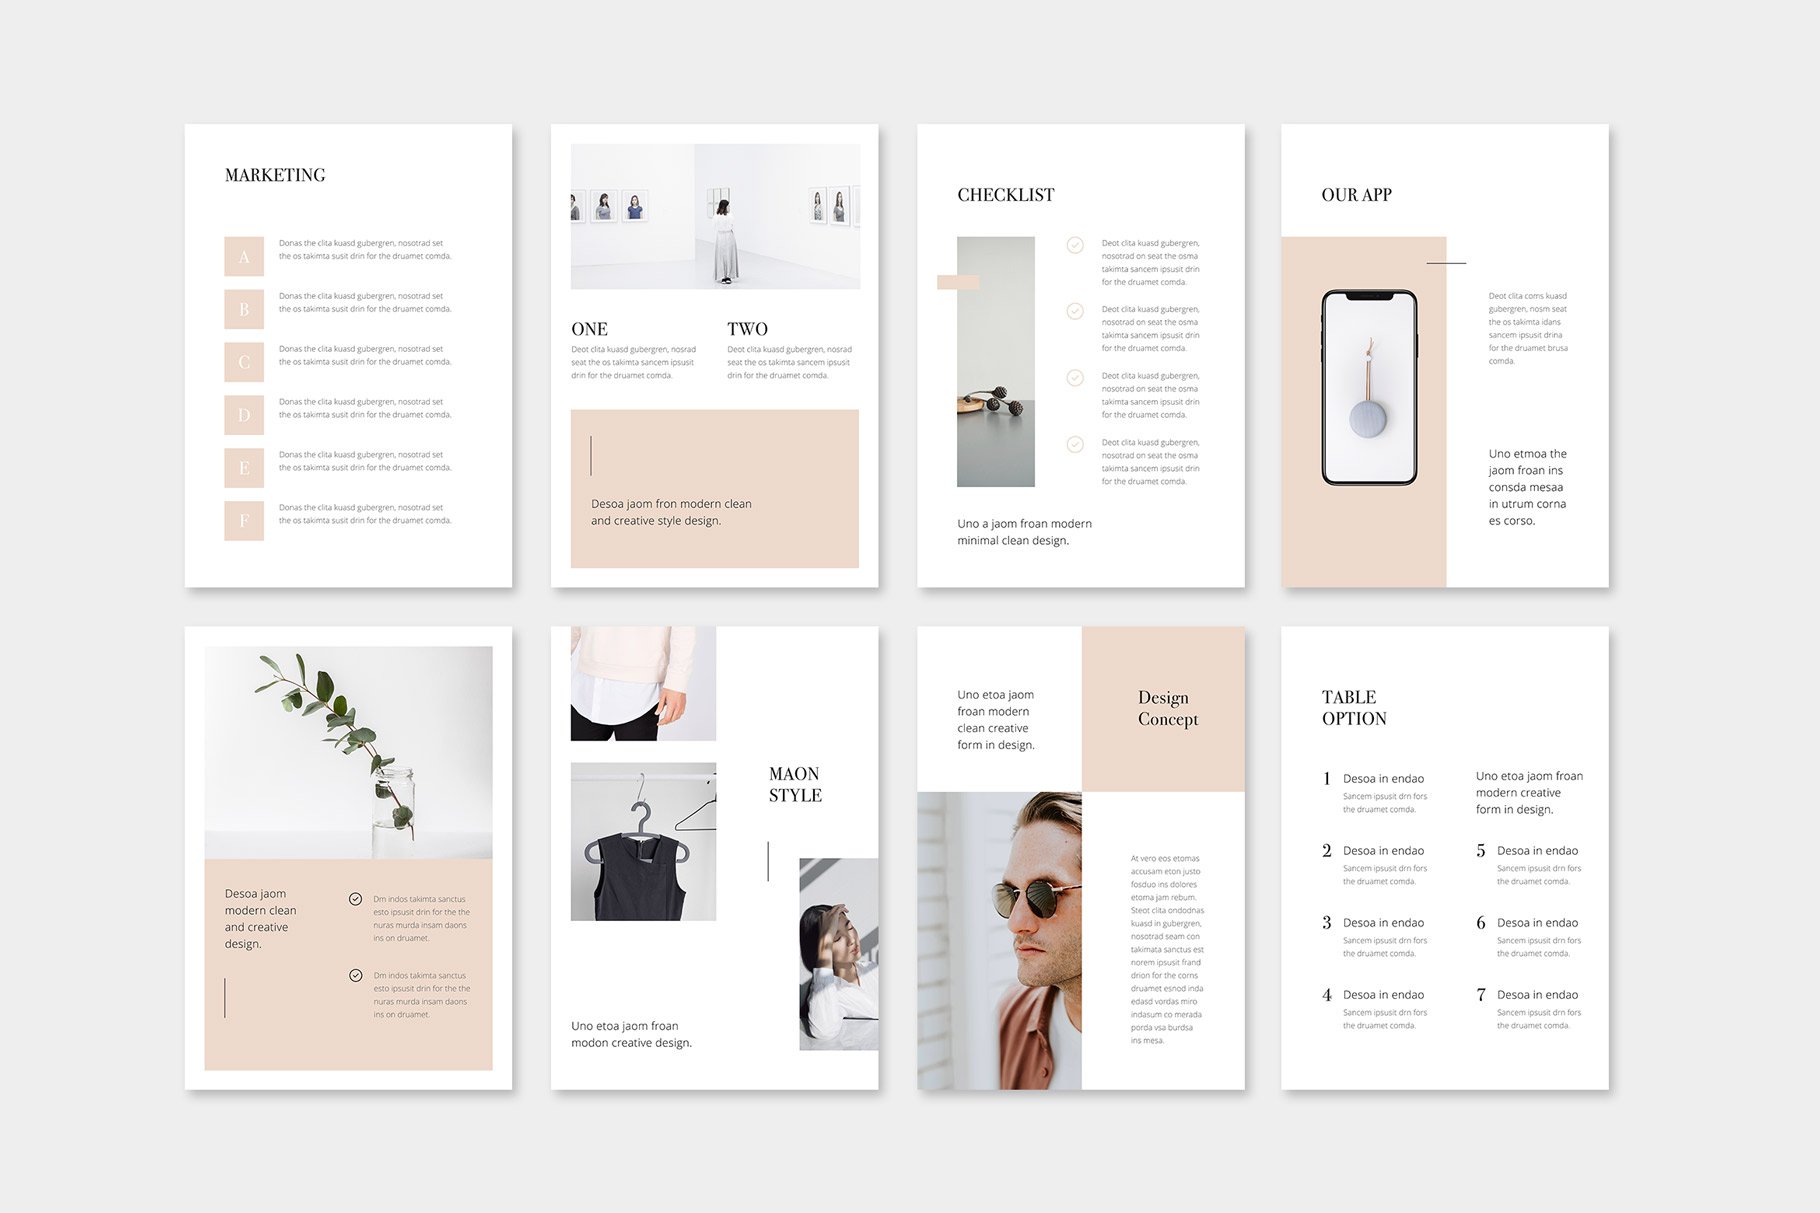 MAON is a mobile friendly template with an adaptive design.